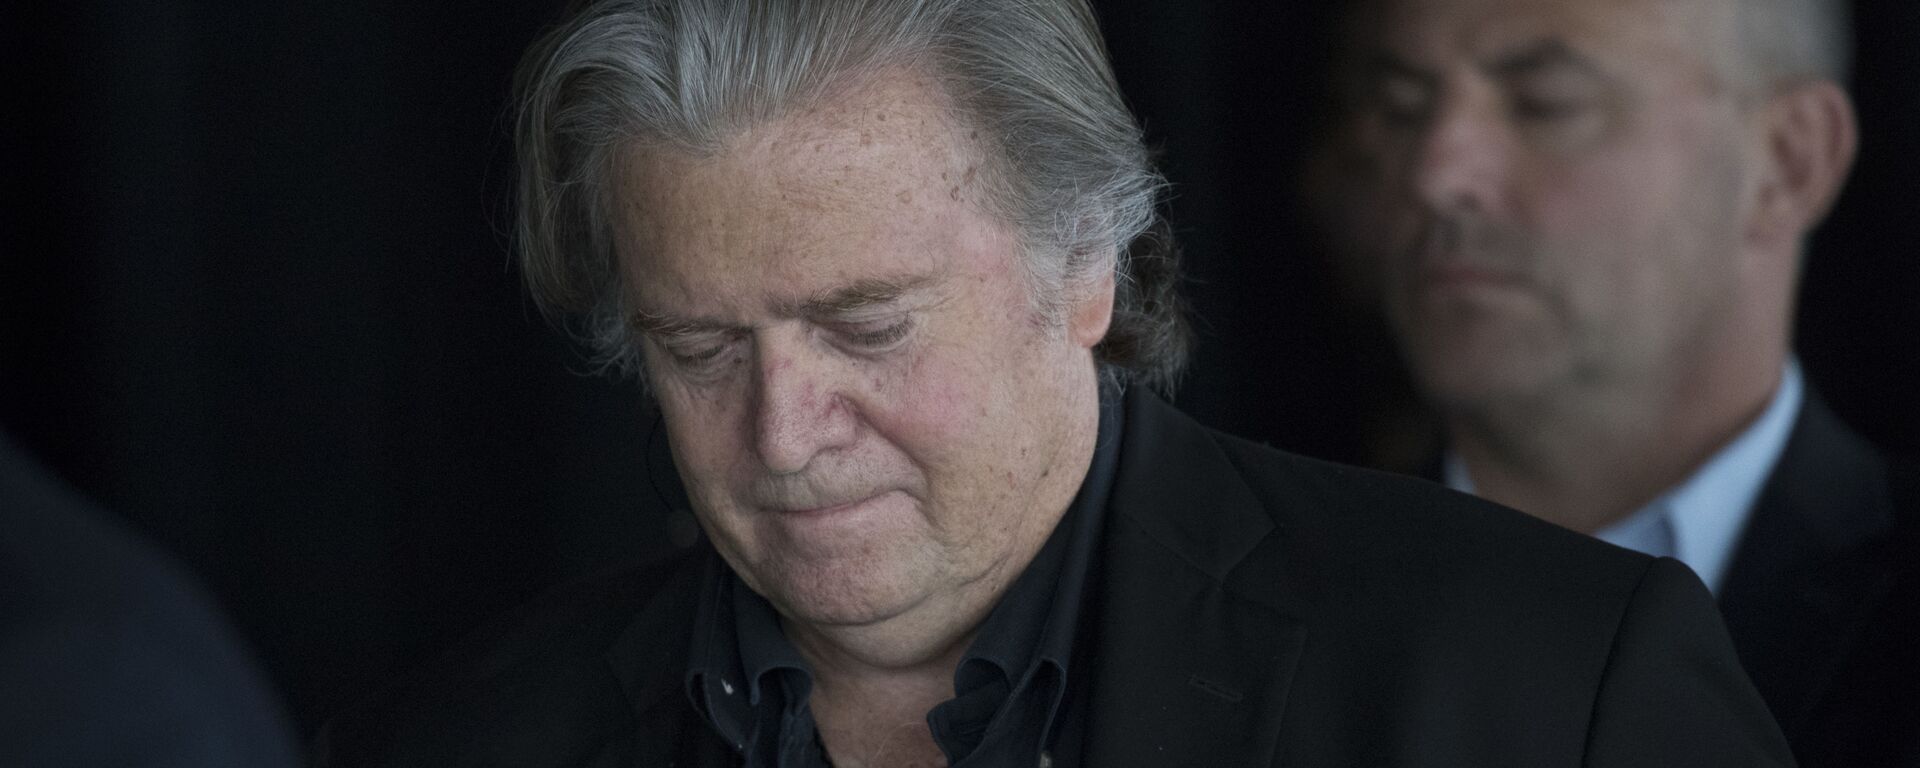 President Donald Trump's former chief strategist Steve Bannon waits to be introduced during an ideas festival sponsored by The Economist, Saturday, Sept. 15, 2018, in New York. Bannon said he's surprised the #MeToo movement hasn't had more impact on corporate America.  - Sputnik International, 1920, 07.12.2021